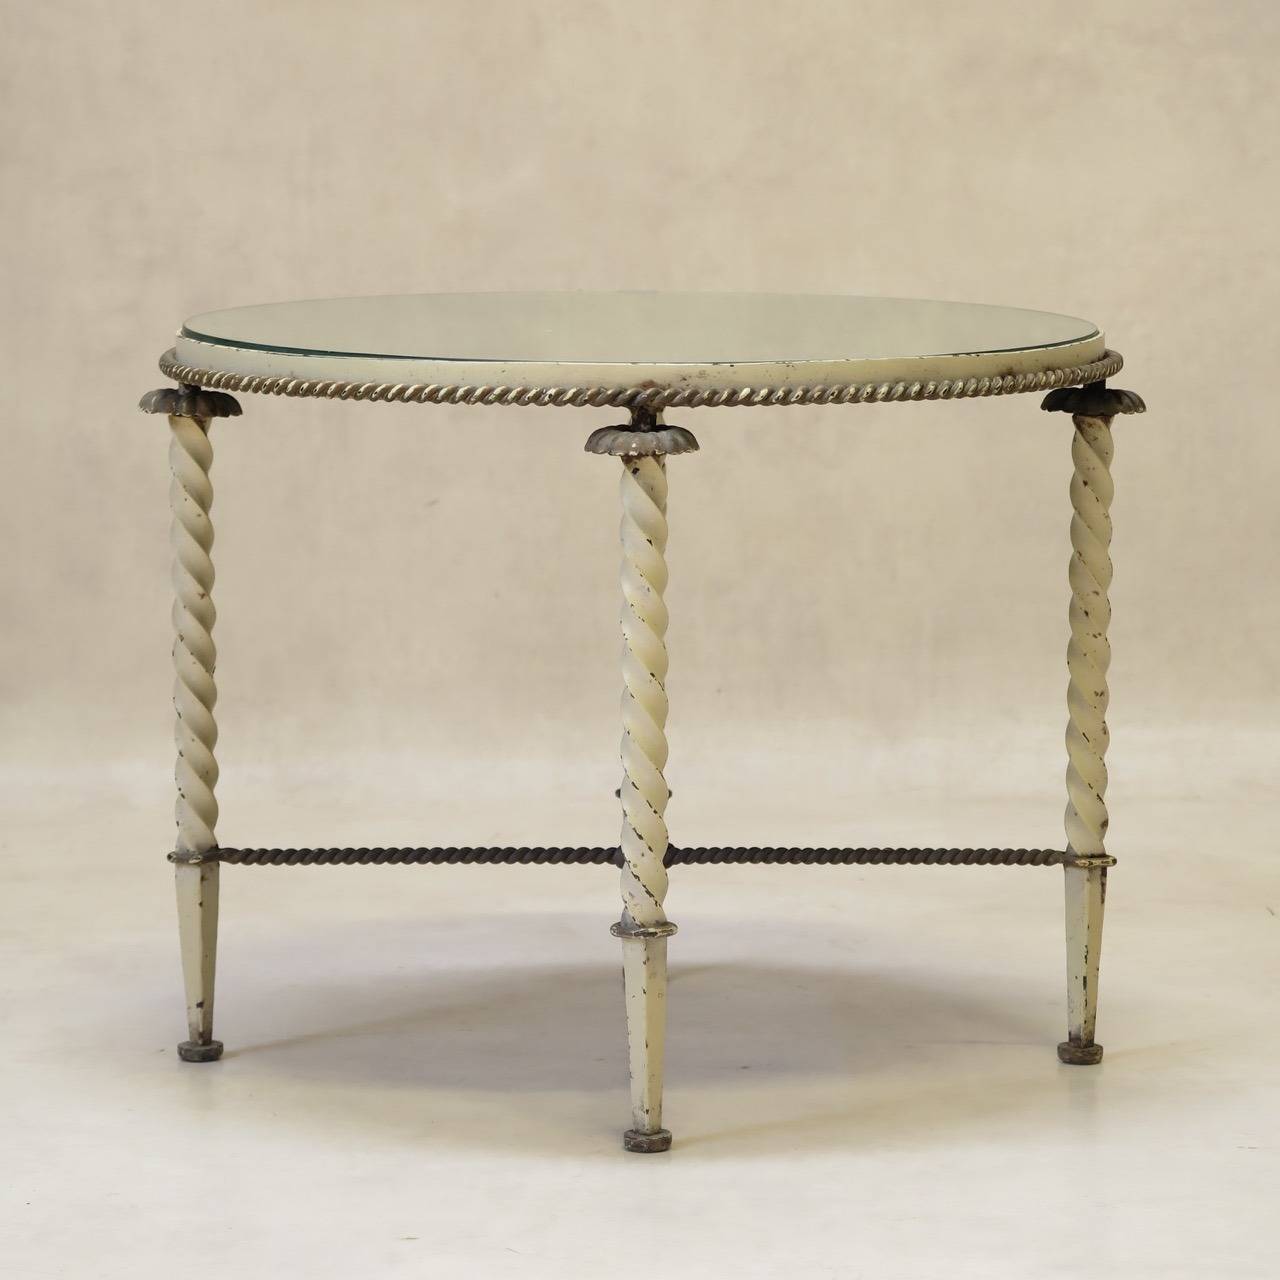 Wrought iron side table attributed to Gilbert Poillerat, raised on four twisted iron legs with iron rosette detail. X-shaped wrought iron rope stretcher. Twisted rope detail equally around the base of the apron. Painted off-white, with gilt accents.